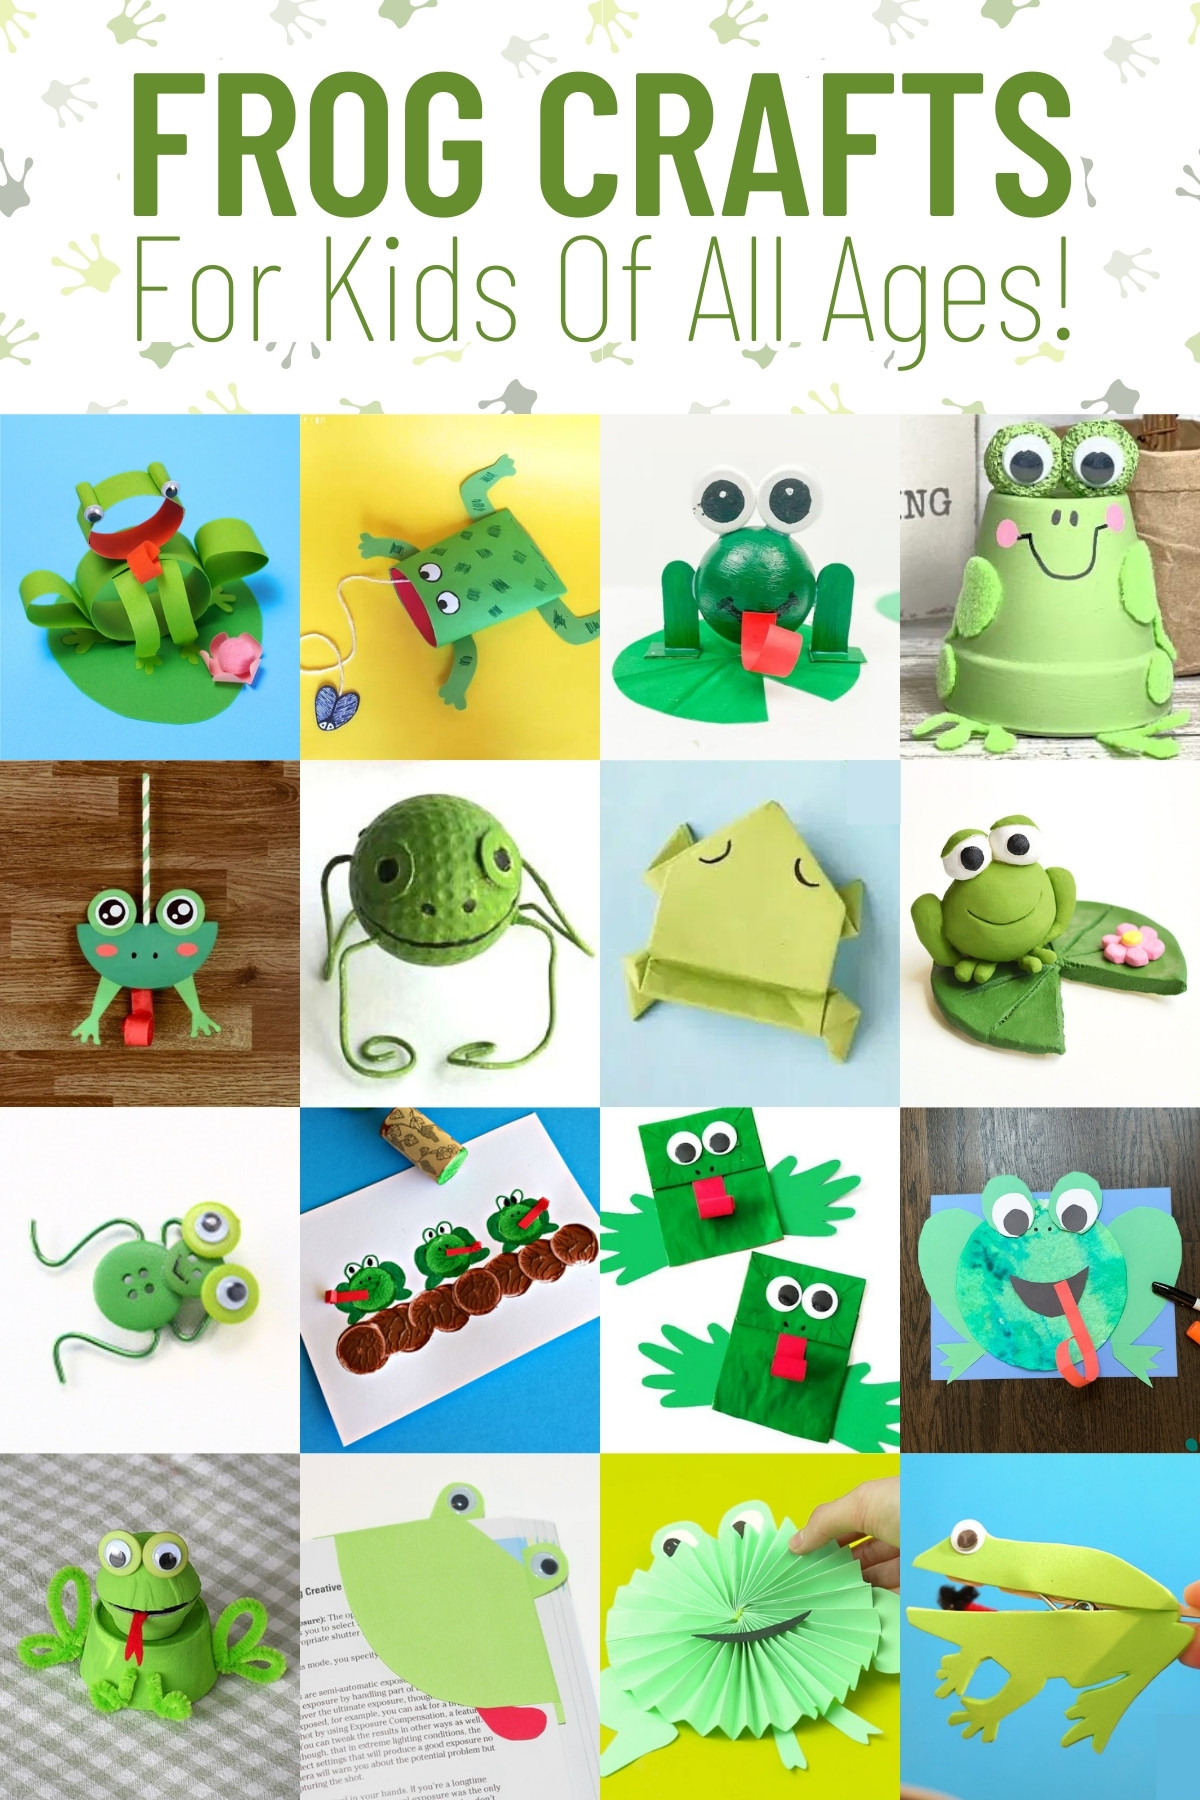 frog crafts for kids of all ages